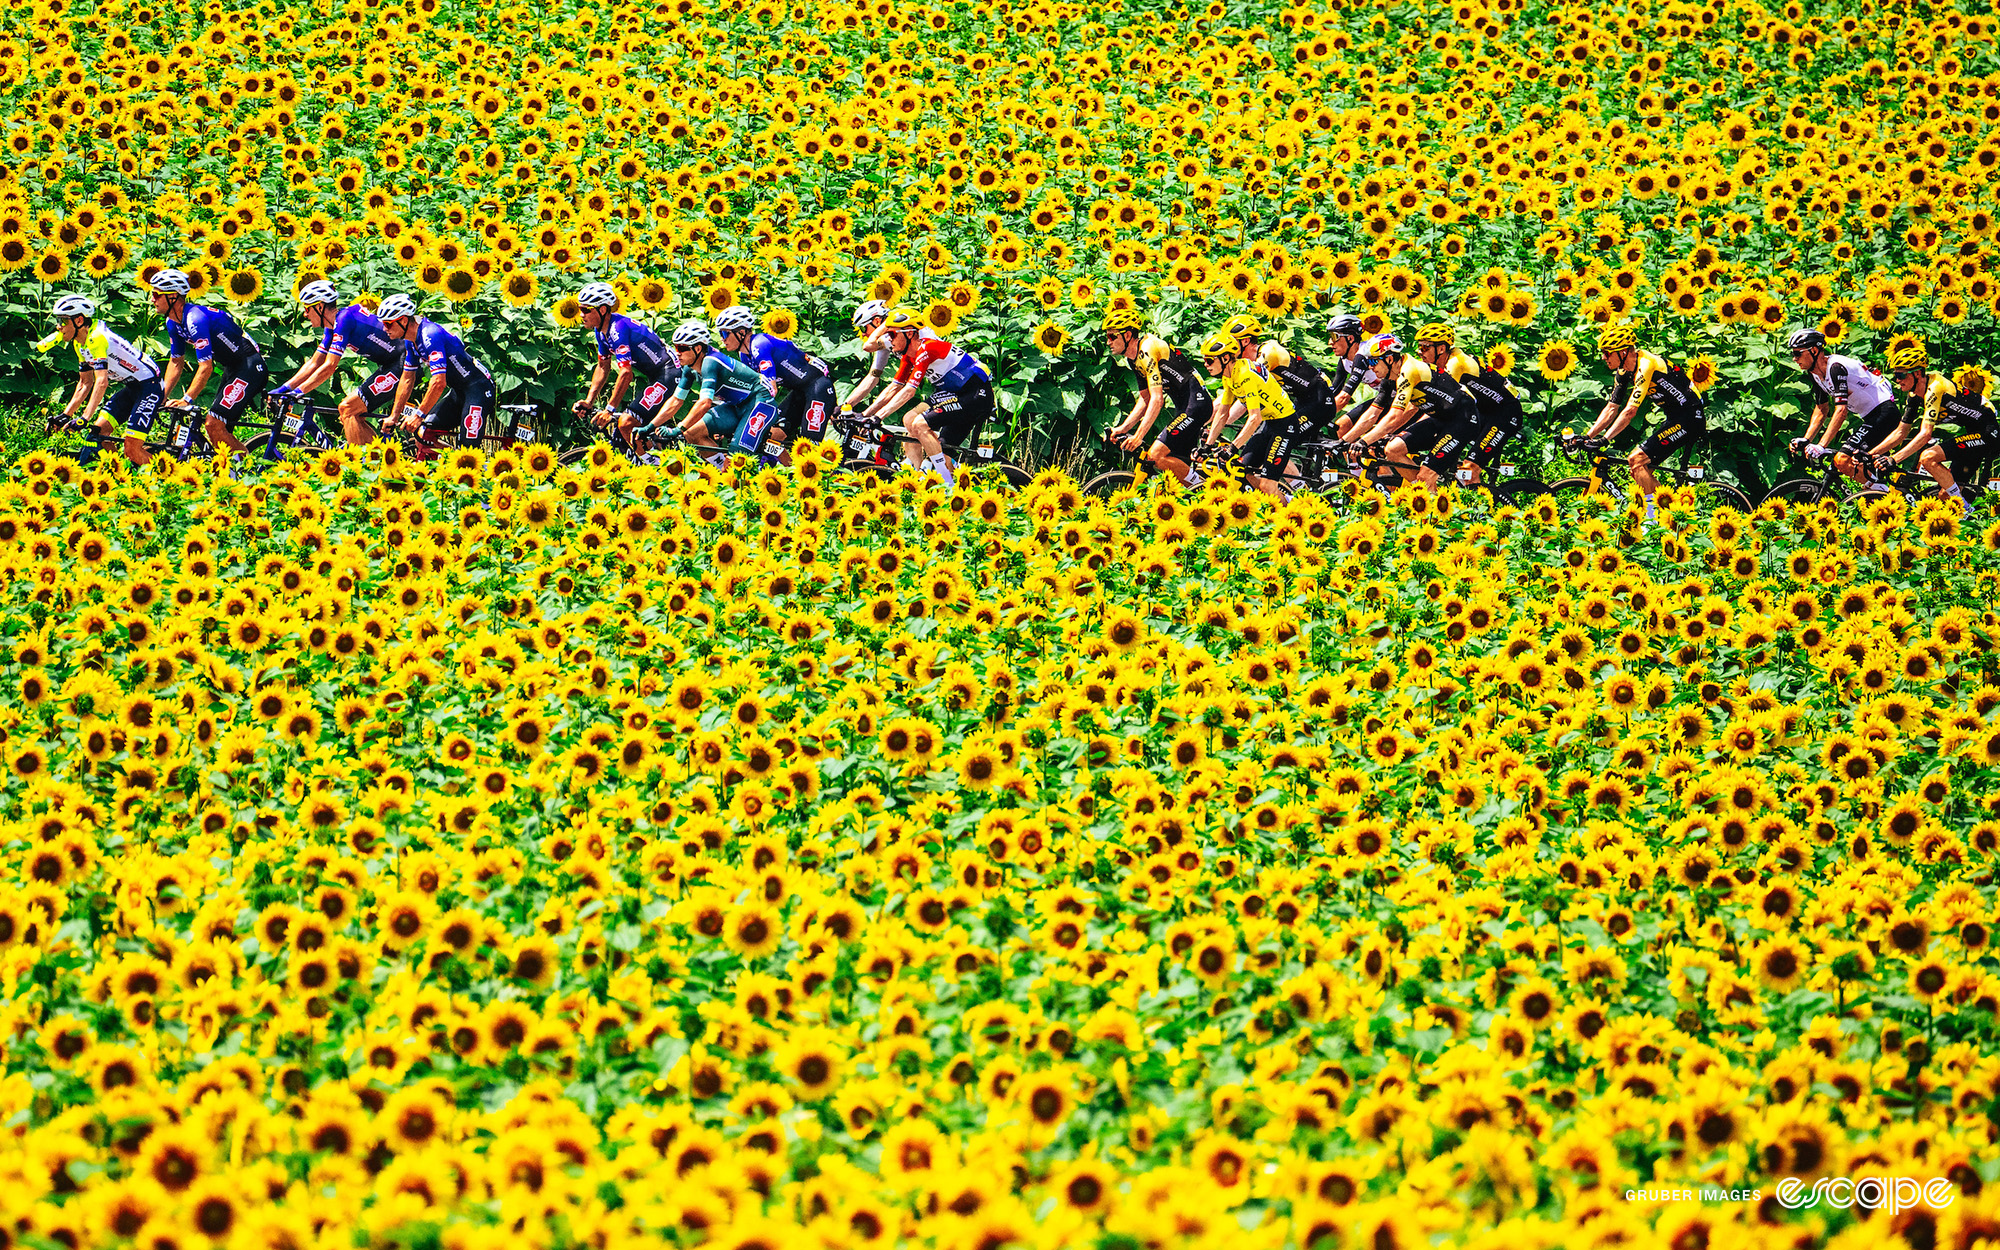 Tour riders pass a field of sunflowers.